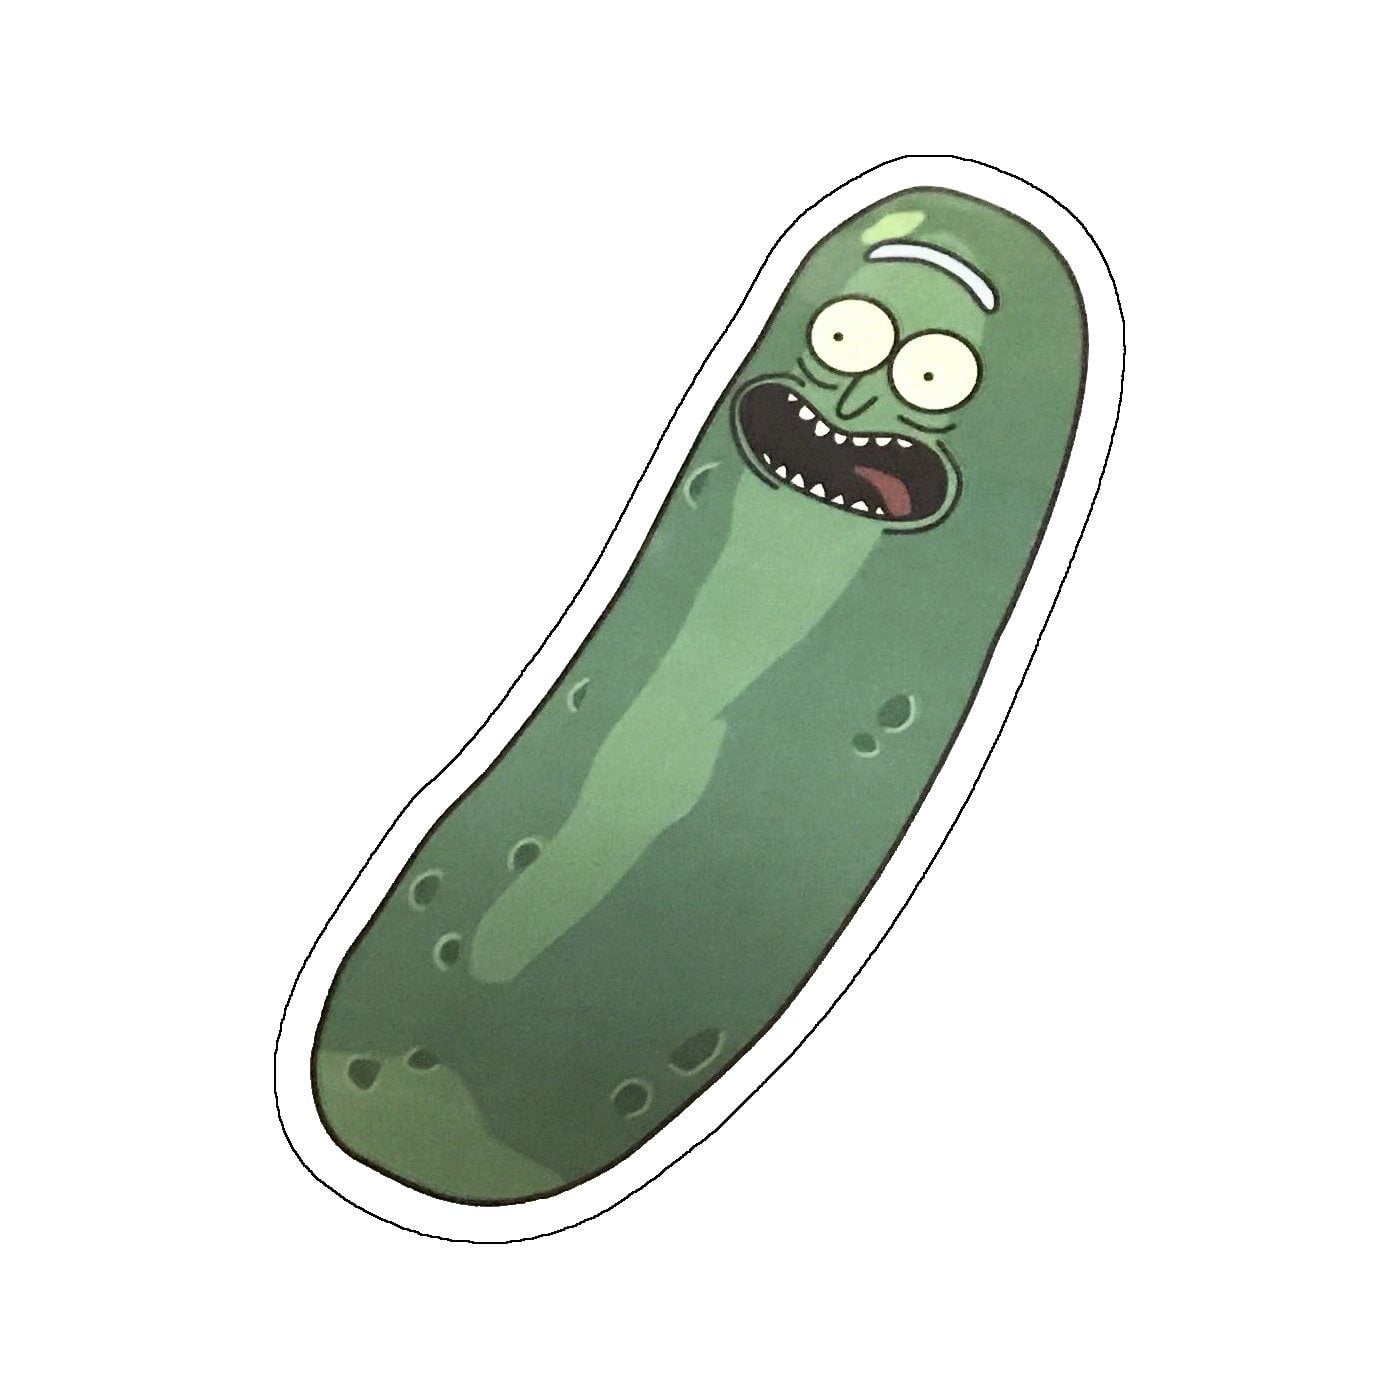 Rick and Morty Animated TV Series Pickle Rick Image Embroidered Patch NEW UNUSED 